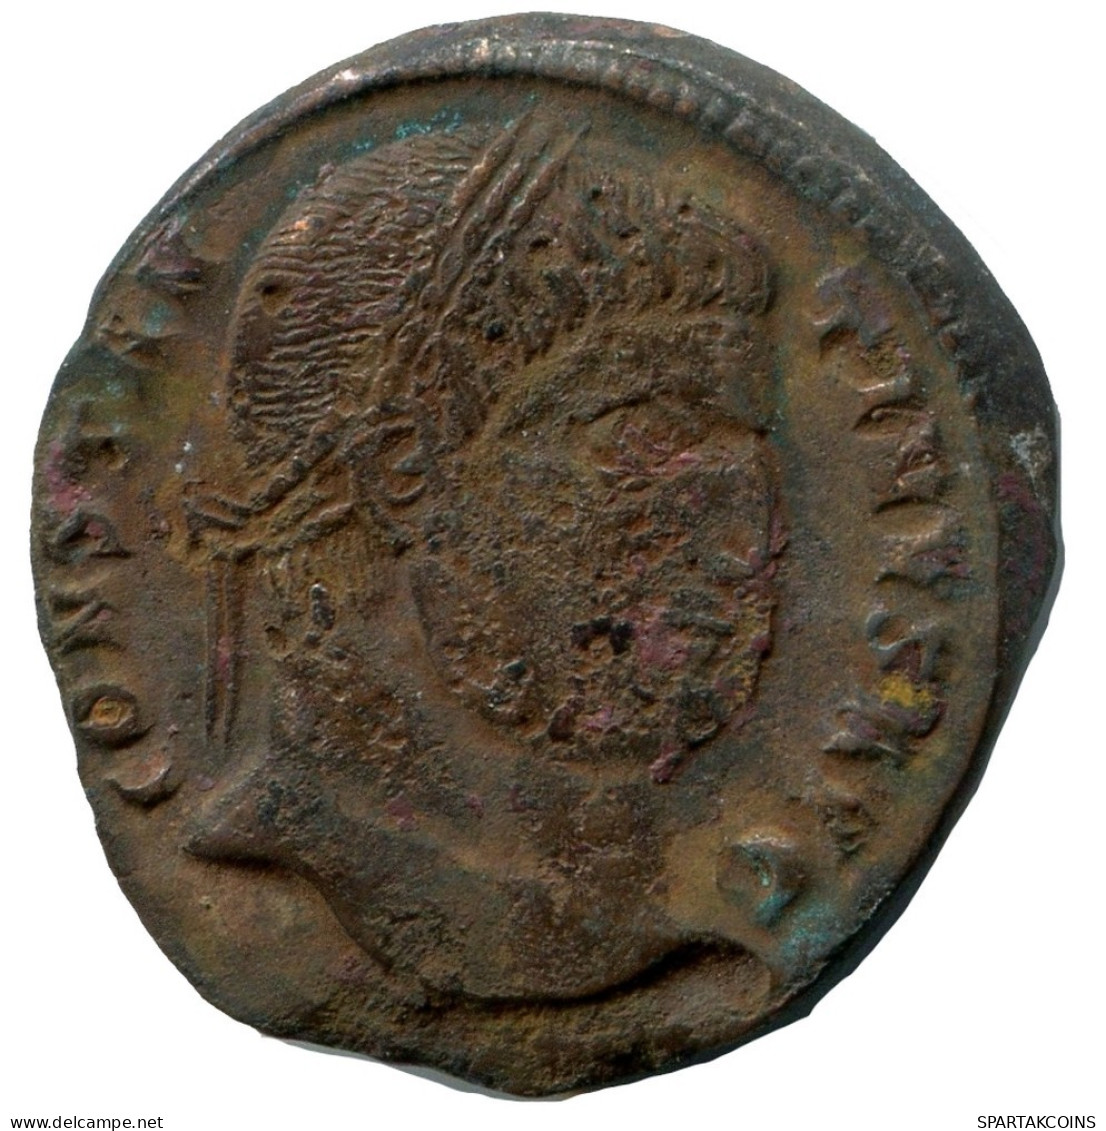 CONSTANTINE I MINTED IN ANTIOCH FOUND IN IHNASYAH HOARD EGYPT #ANC10556.14.E.A - The Christian Empire (307 AD To 363 AD)